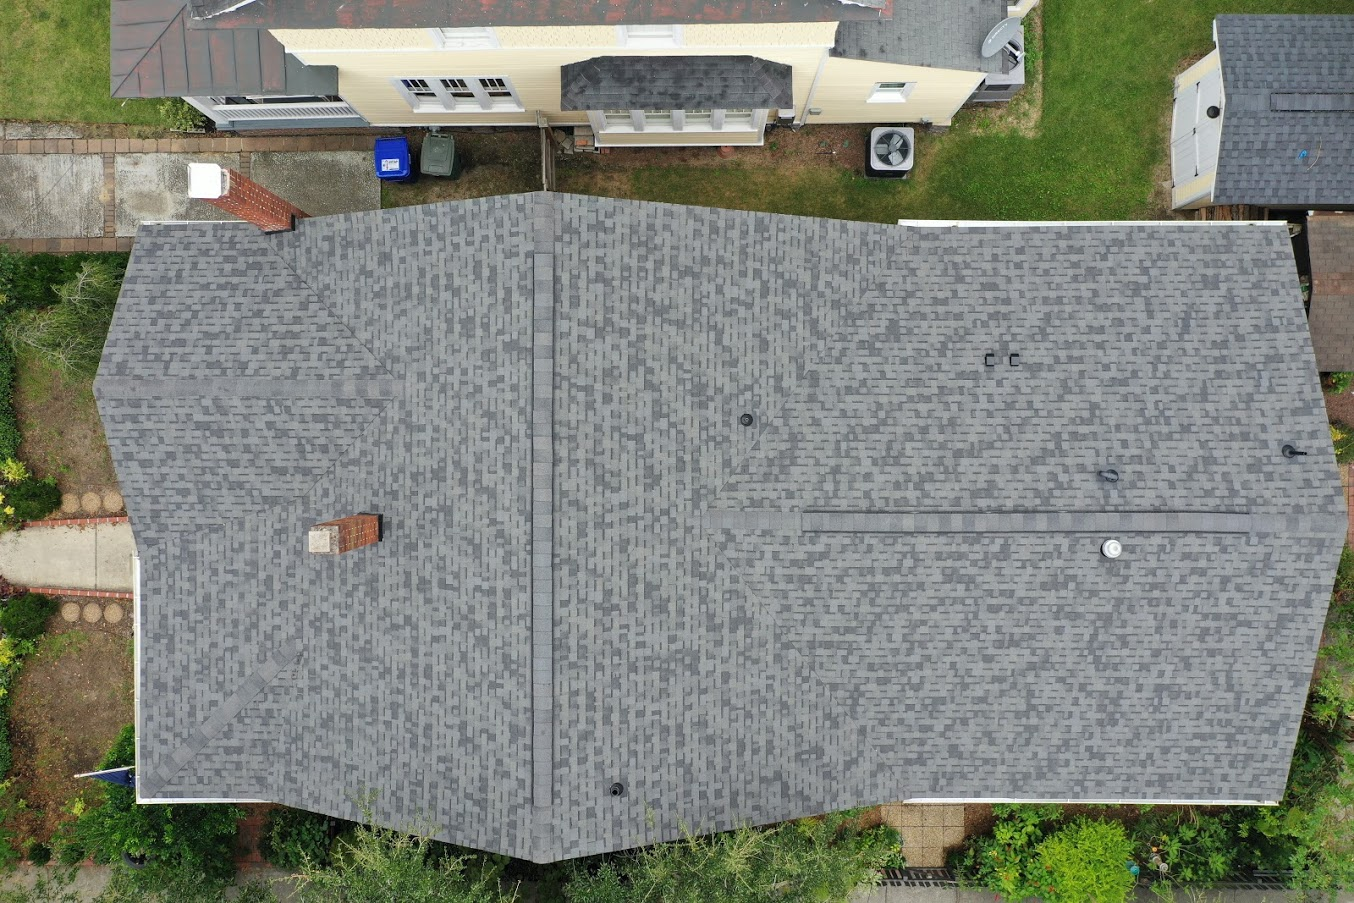 Residential Roofing Shingles